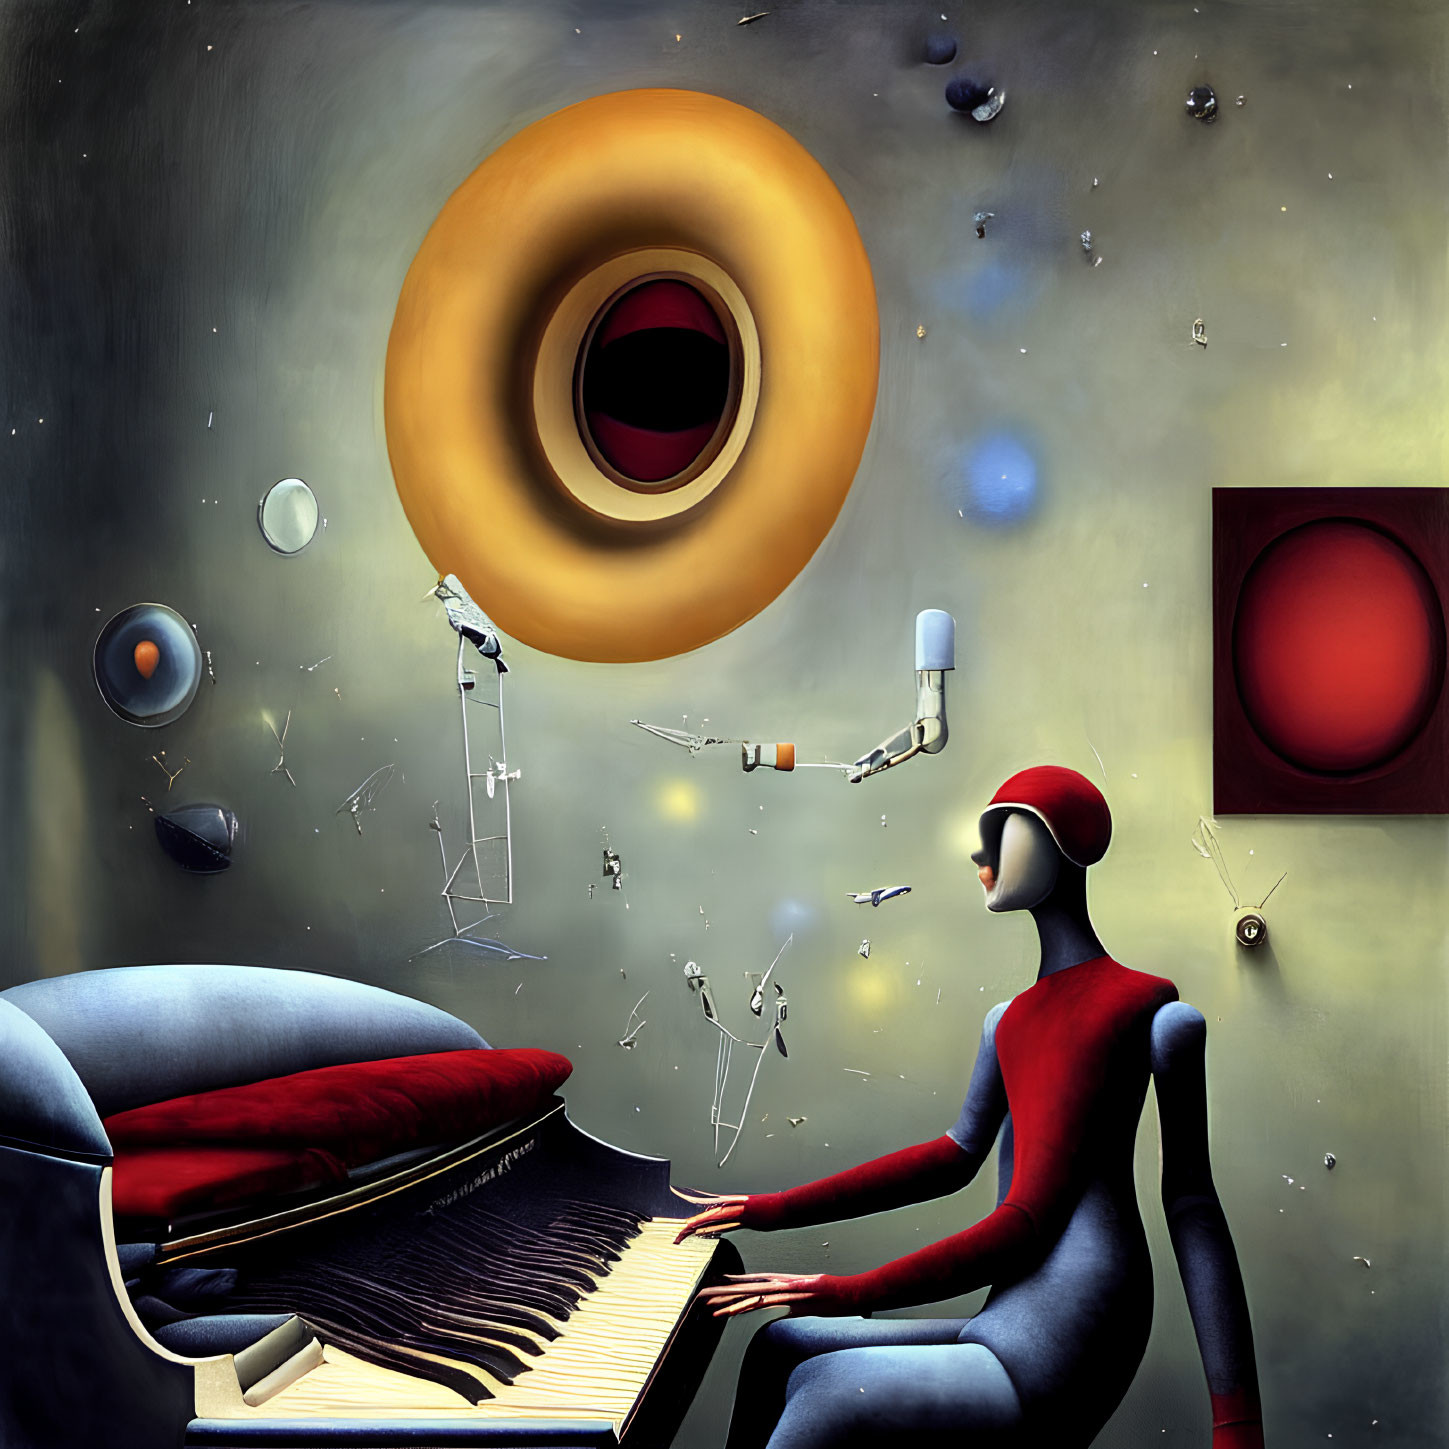 Surreal humanoid figure playing piano with floating eyes